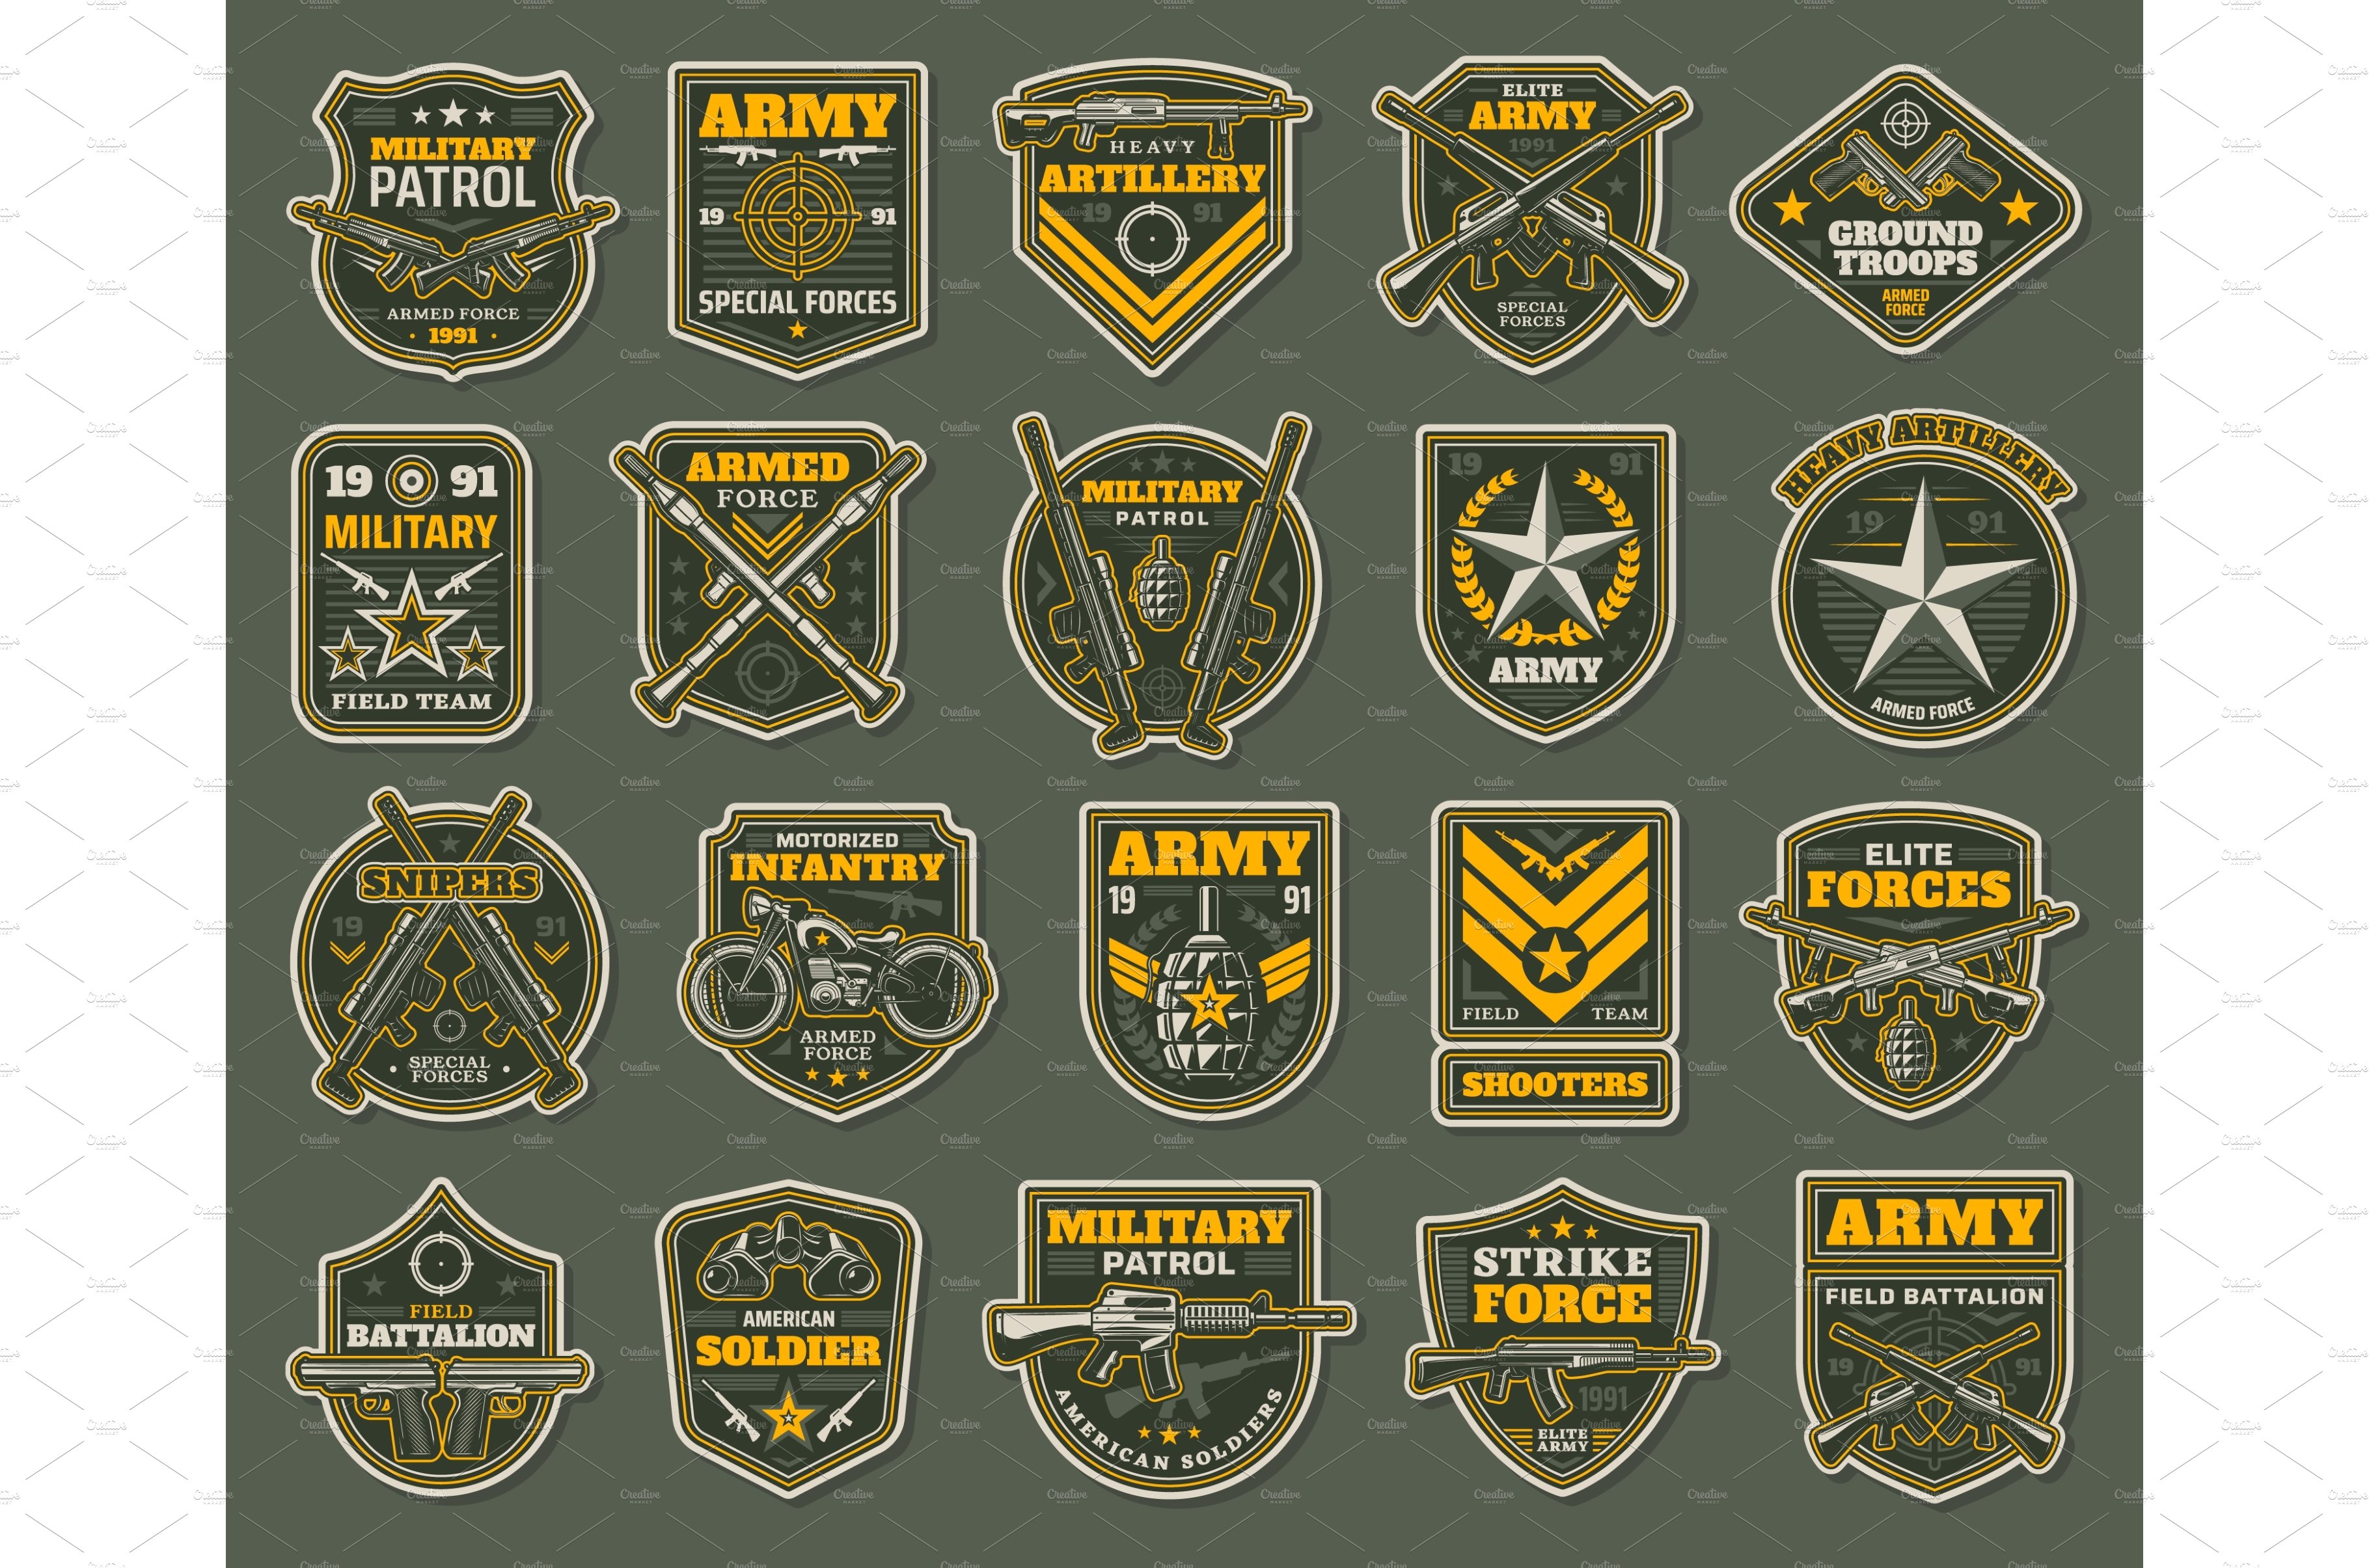 Army special forces, military badges cover image.